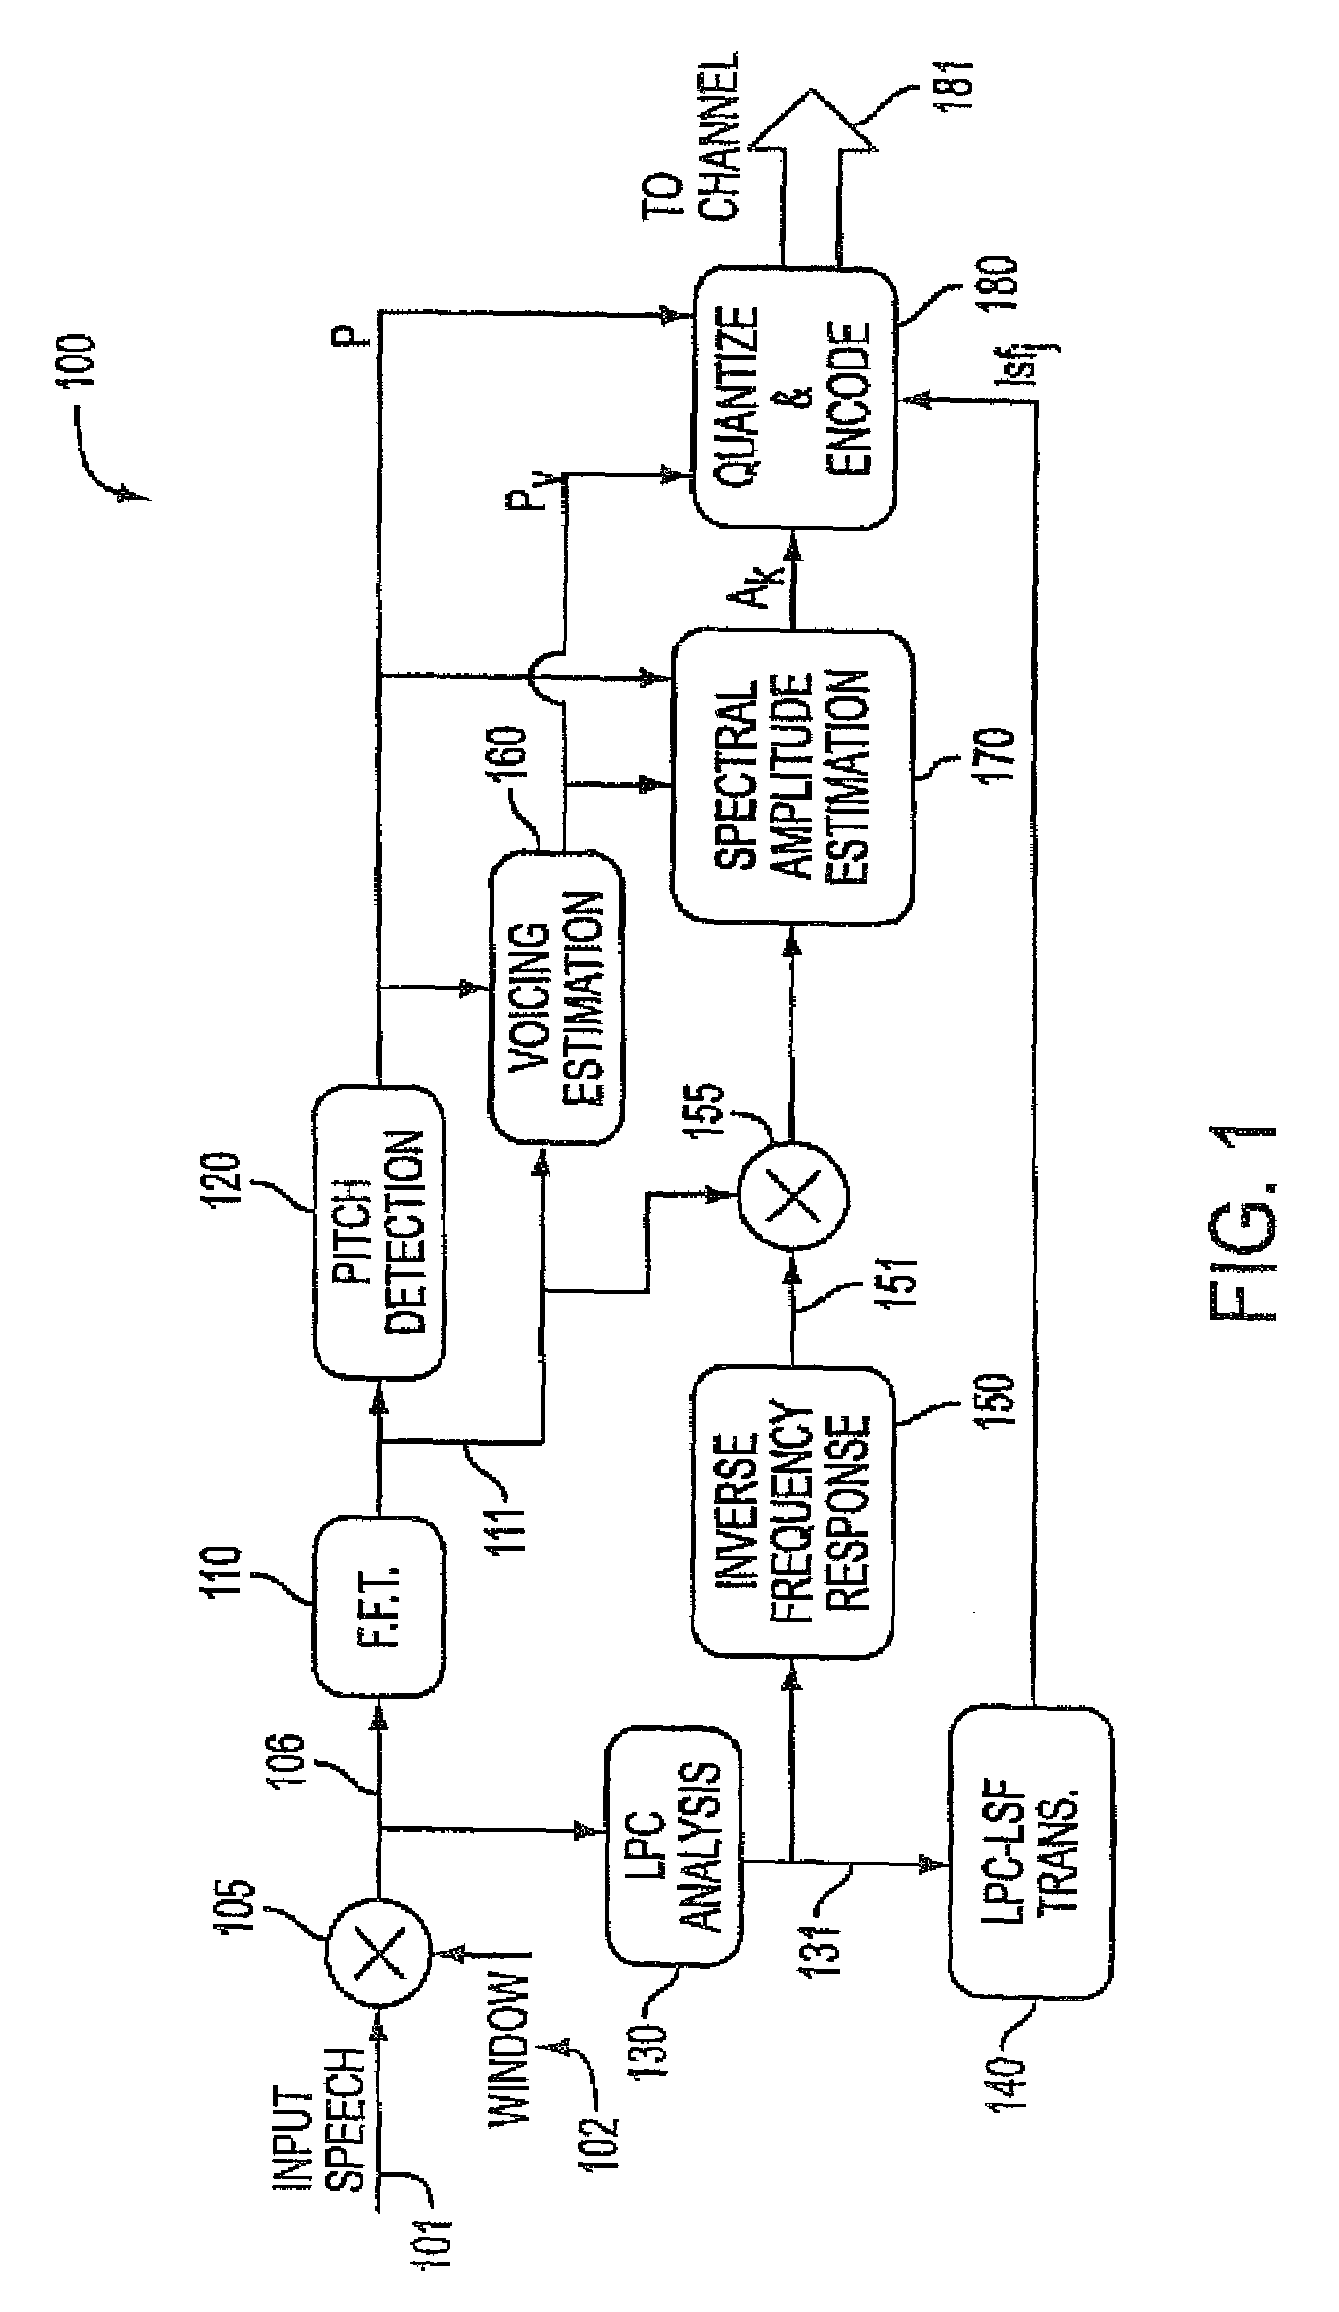 Background noise reduction in sinusoidal based speech coding systems